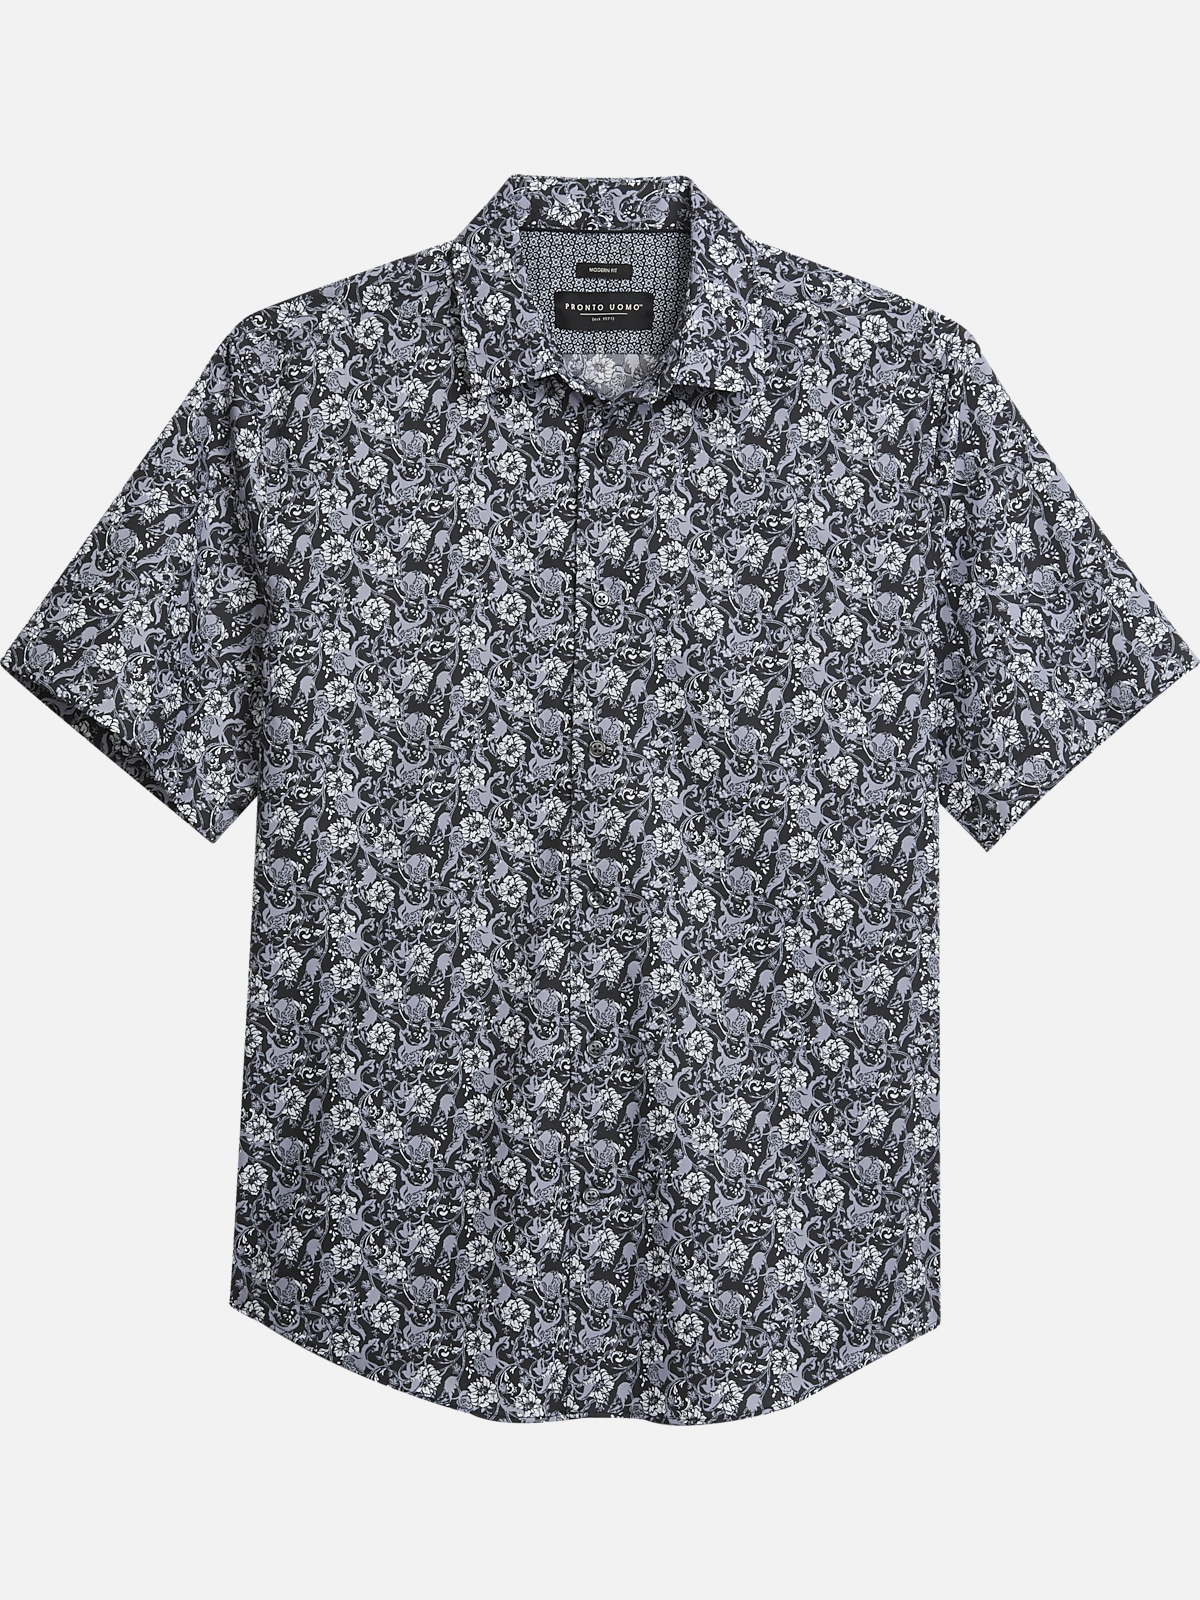 Pronto Uomo Modern Fit Large Floral Sport Shirt | All Clearance $39.99 ...